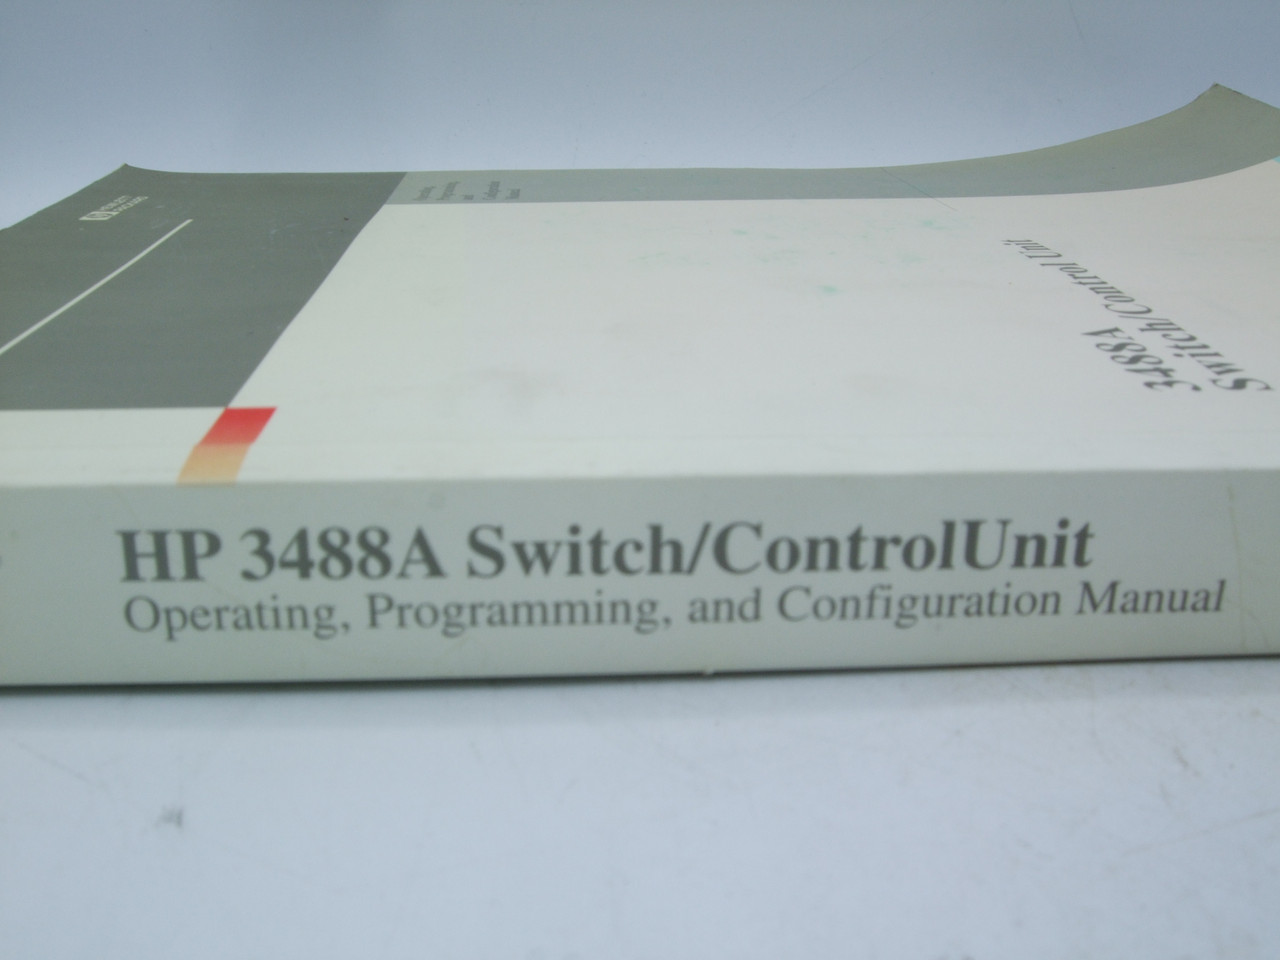 HP 3488A Switch/Control Unit Operating, Programming, and Configuration Manual